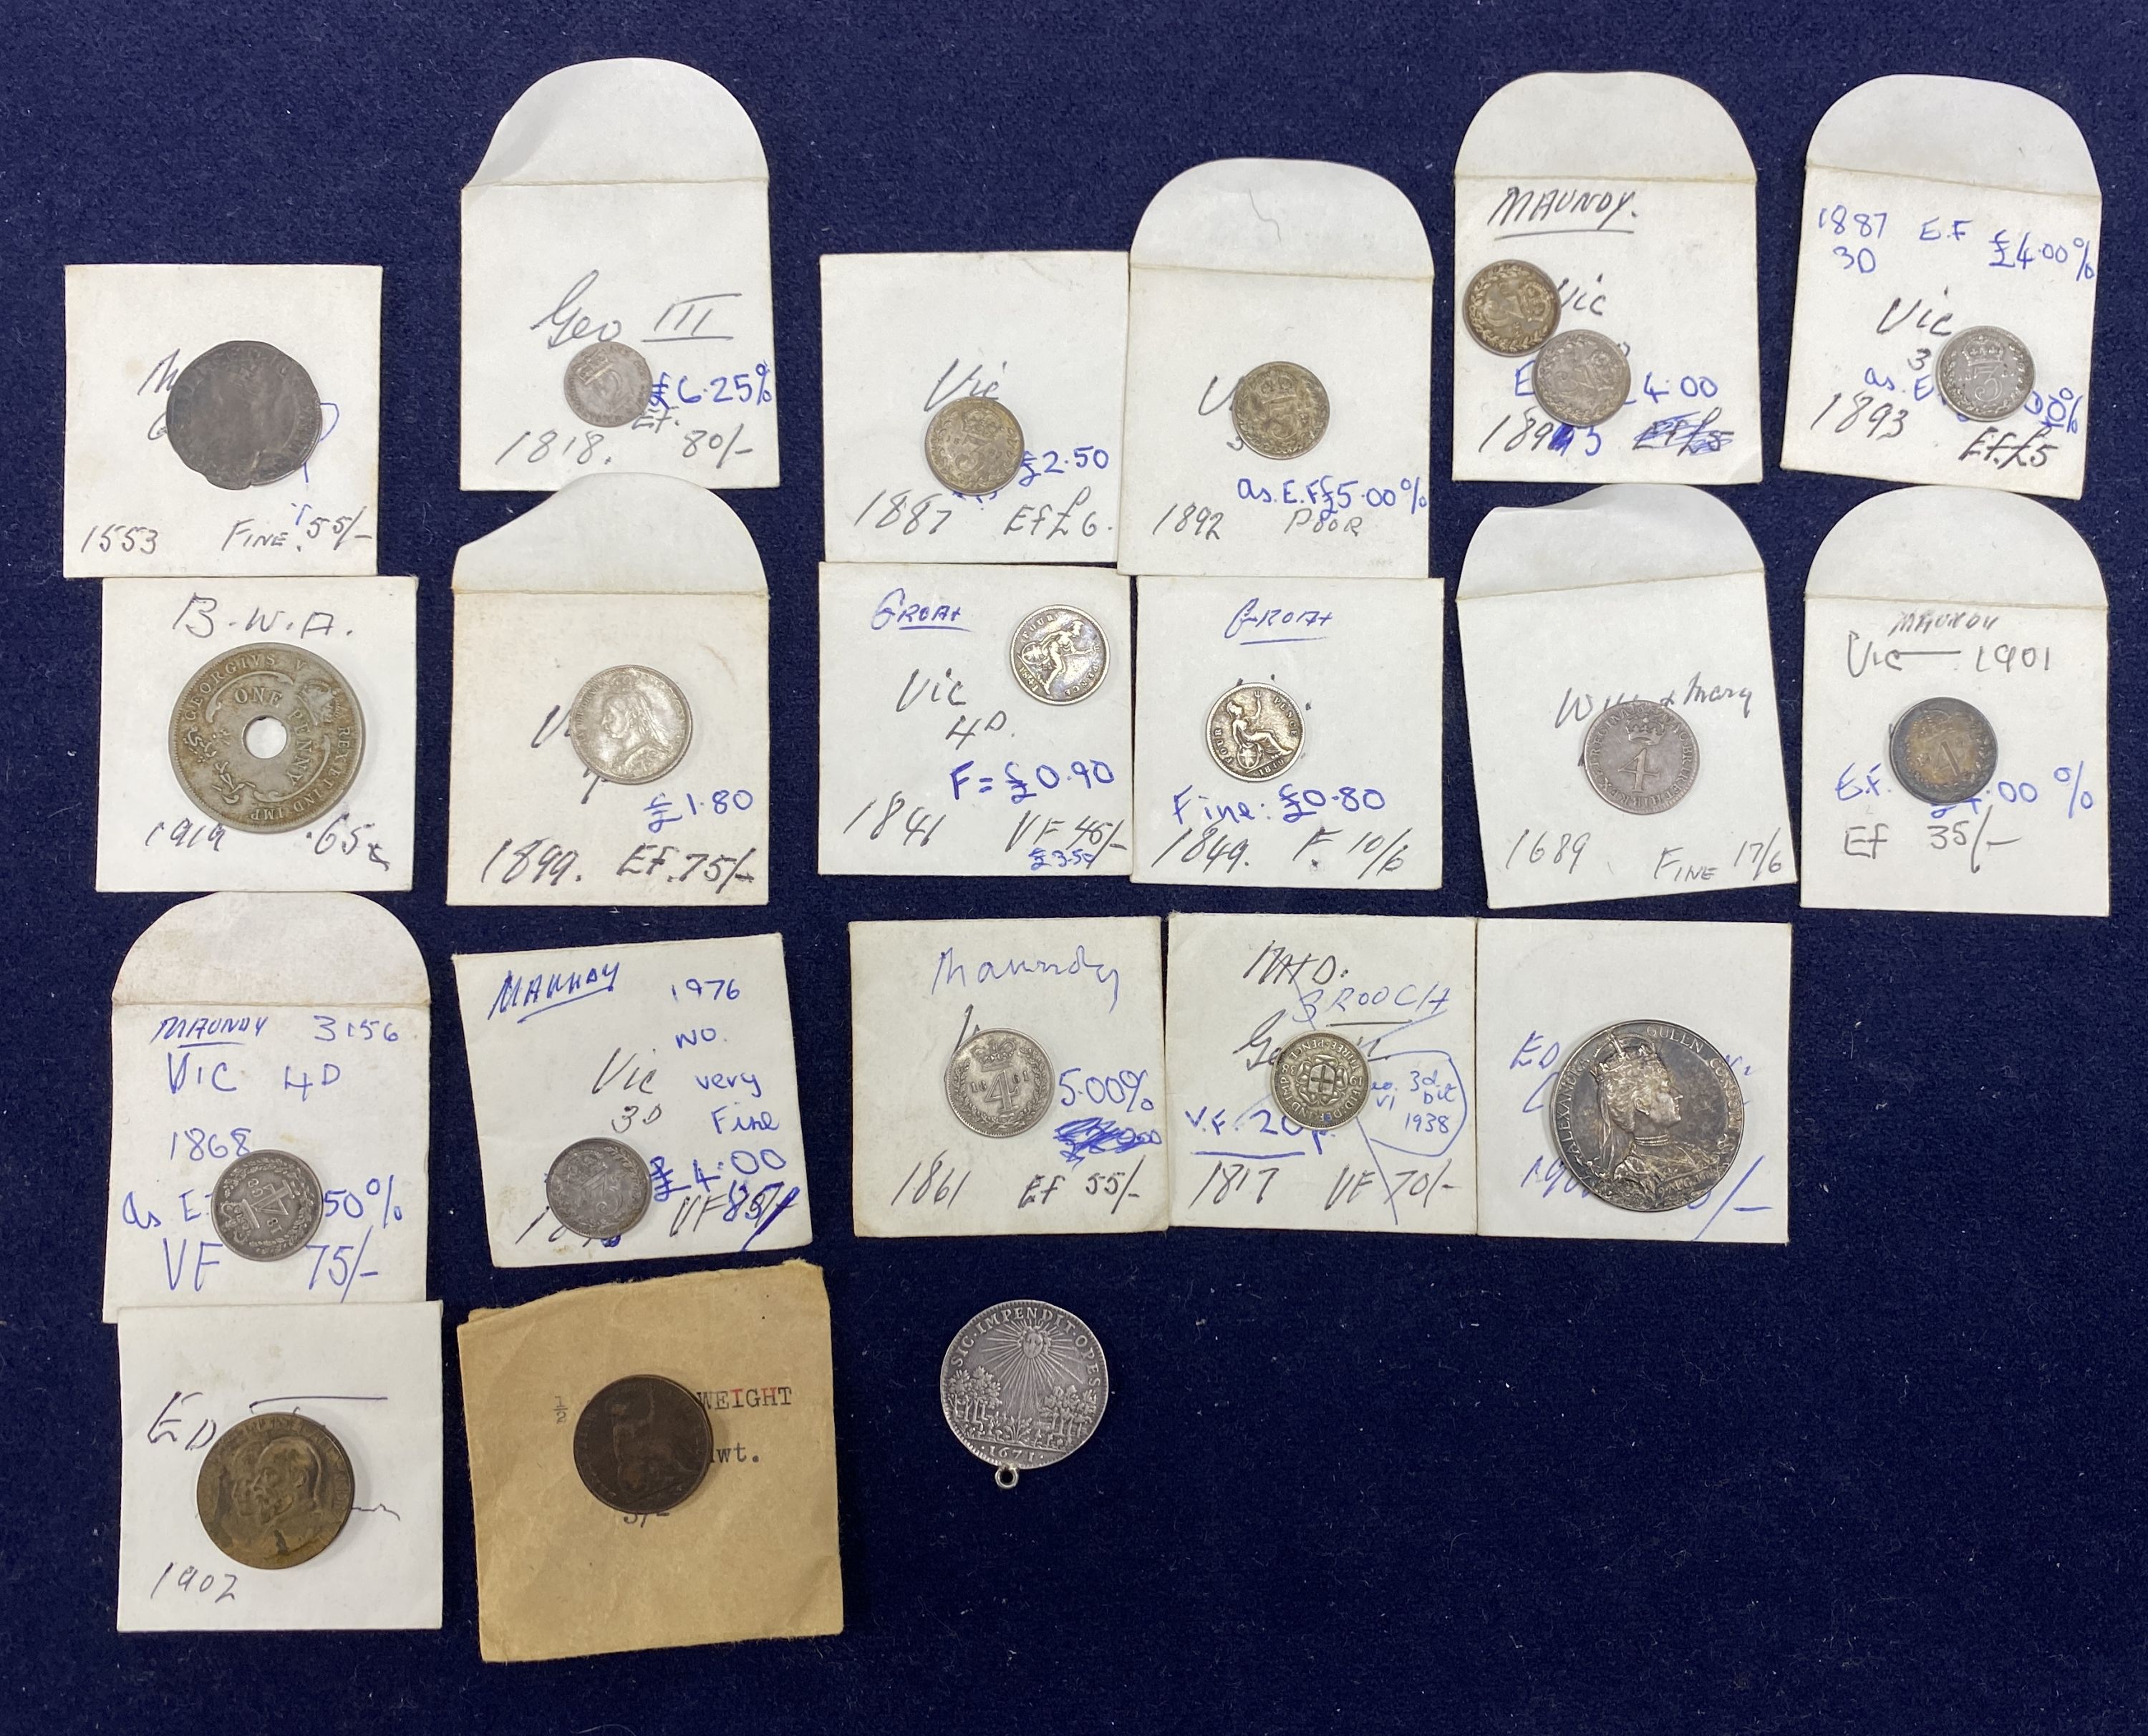 UK coins 16th-20th century, to include a Mary I groat, various maundy 2d - 4d, etc. together with